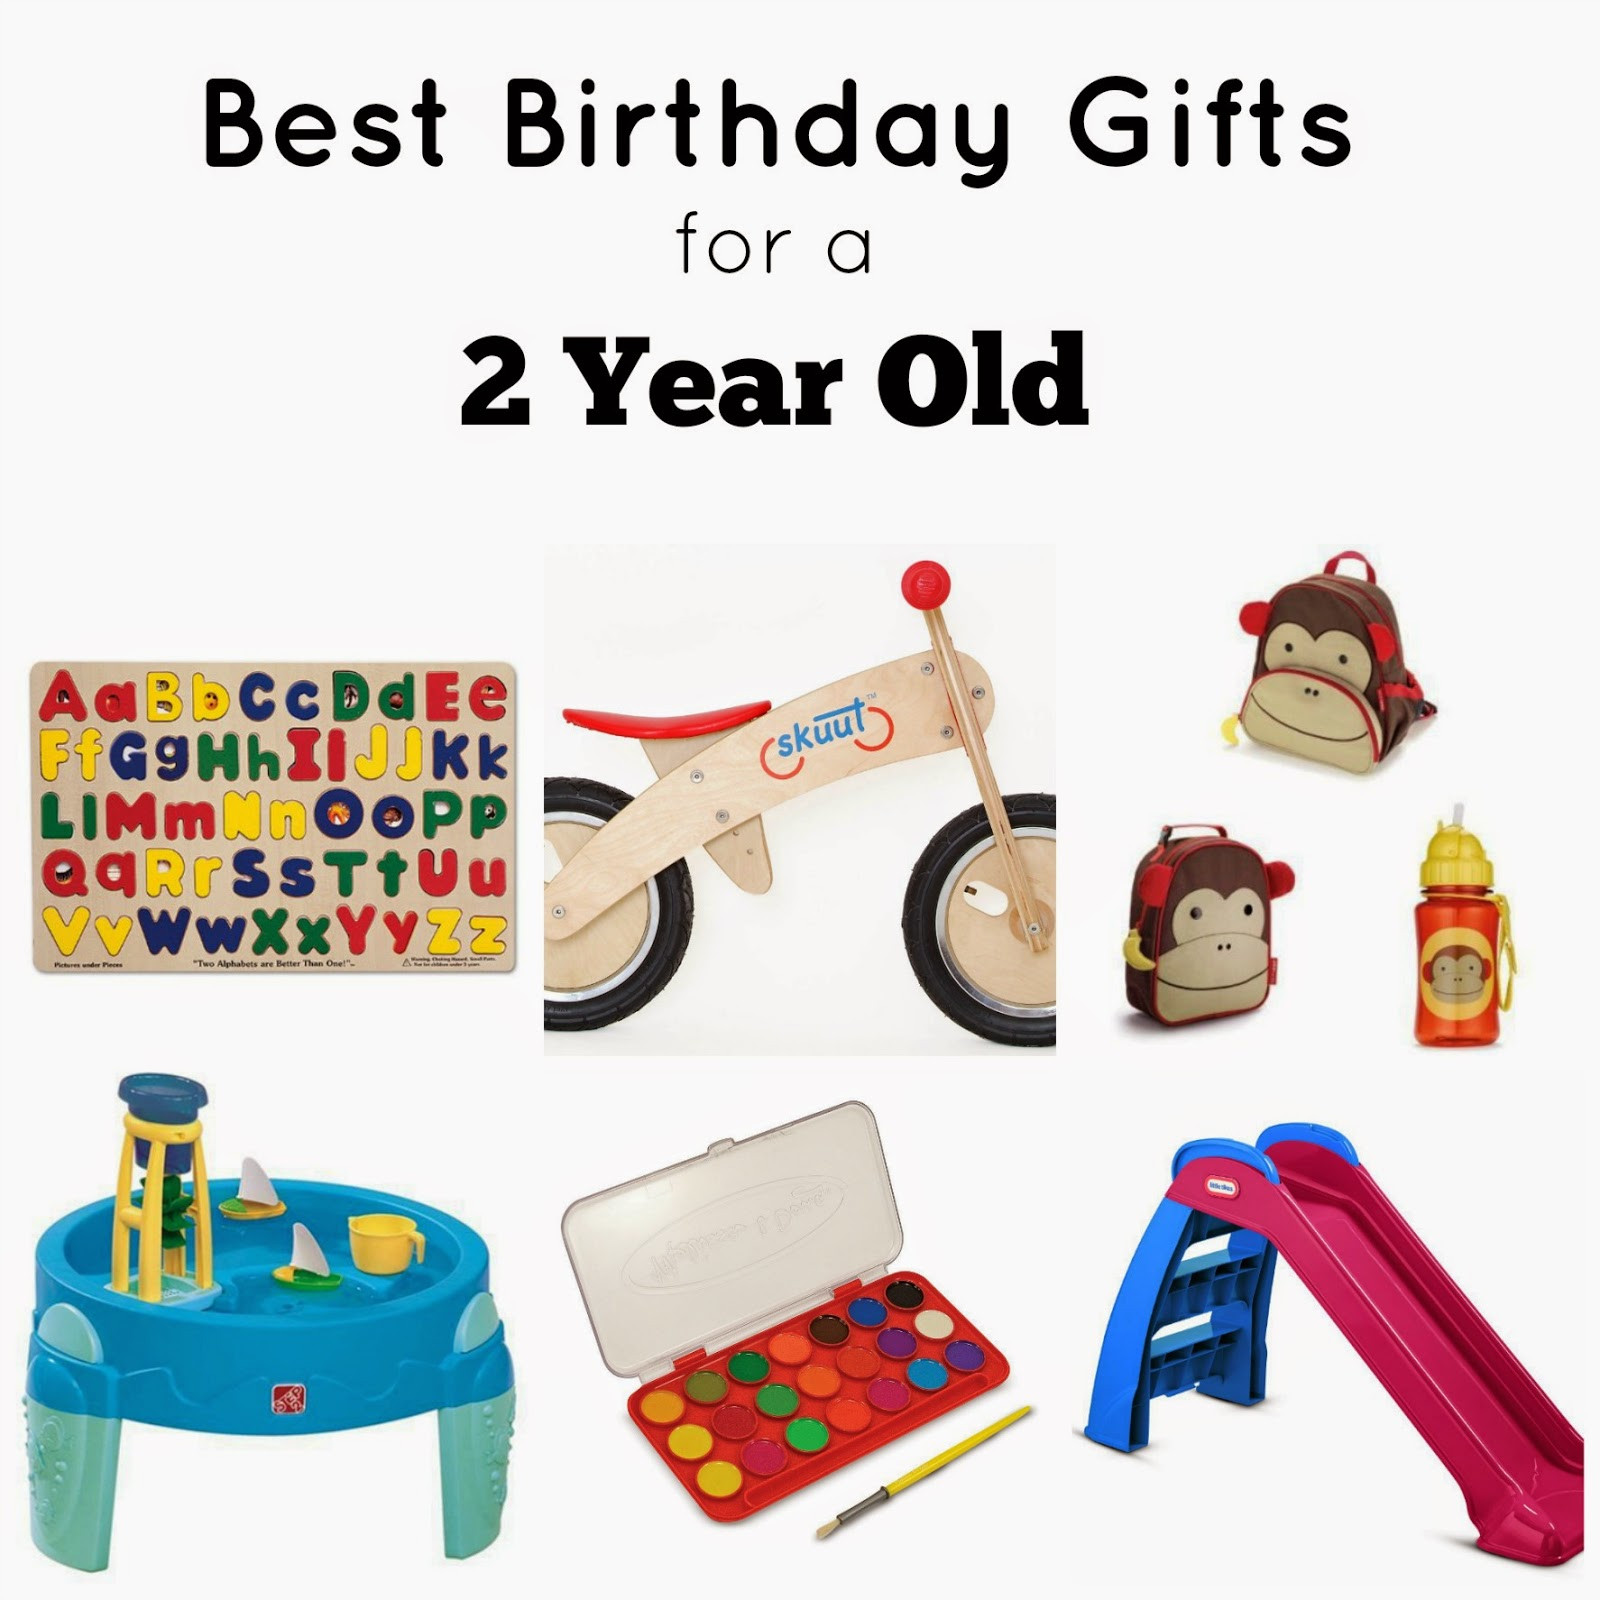 Best ideas about Two Year Old Birthday Gifts
. Save or Pin Our Life on a Bud Best Birthday Gifts for a 2 Year Old Now.